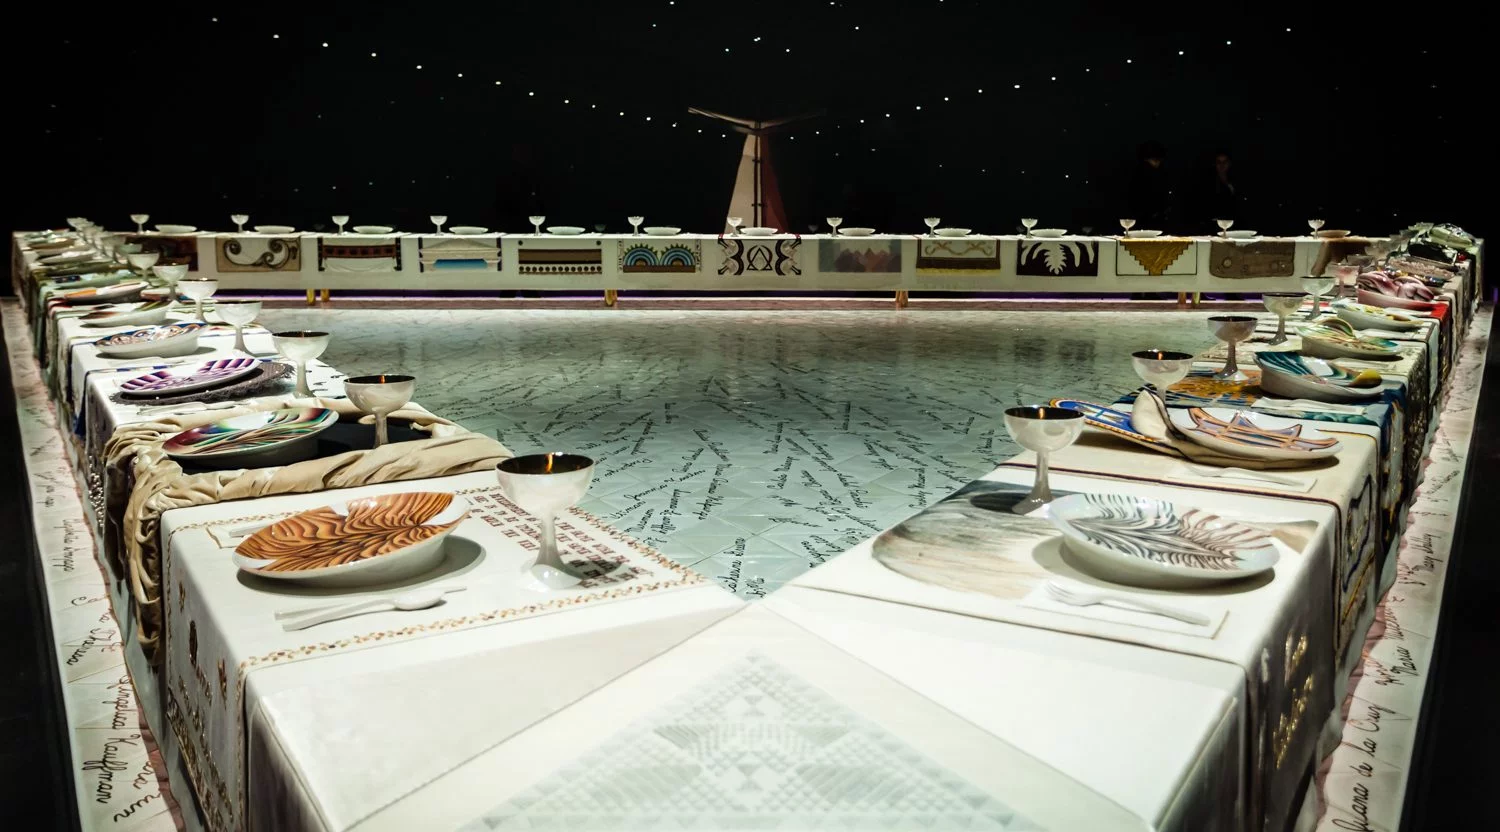 Judy Chicago, The Dinner Party, 1974-1979, Elizabeth A. Sackler Center for Feminist Art at the Brooklyn Museum, New York, NY, USA. Kevin Case/Flickr (CC BY-NC-SA 2.0). Détail.